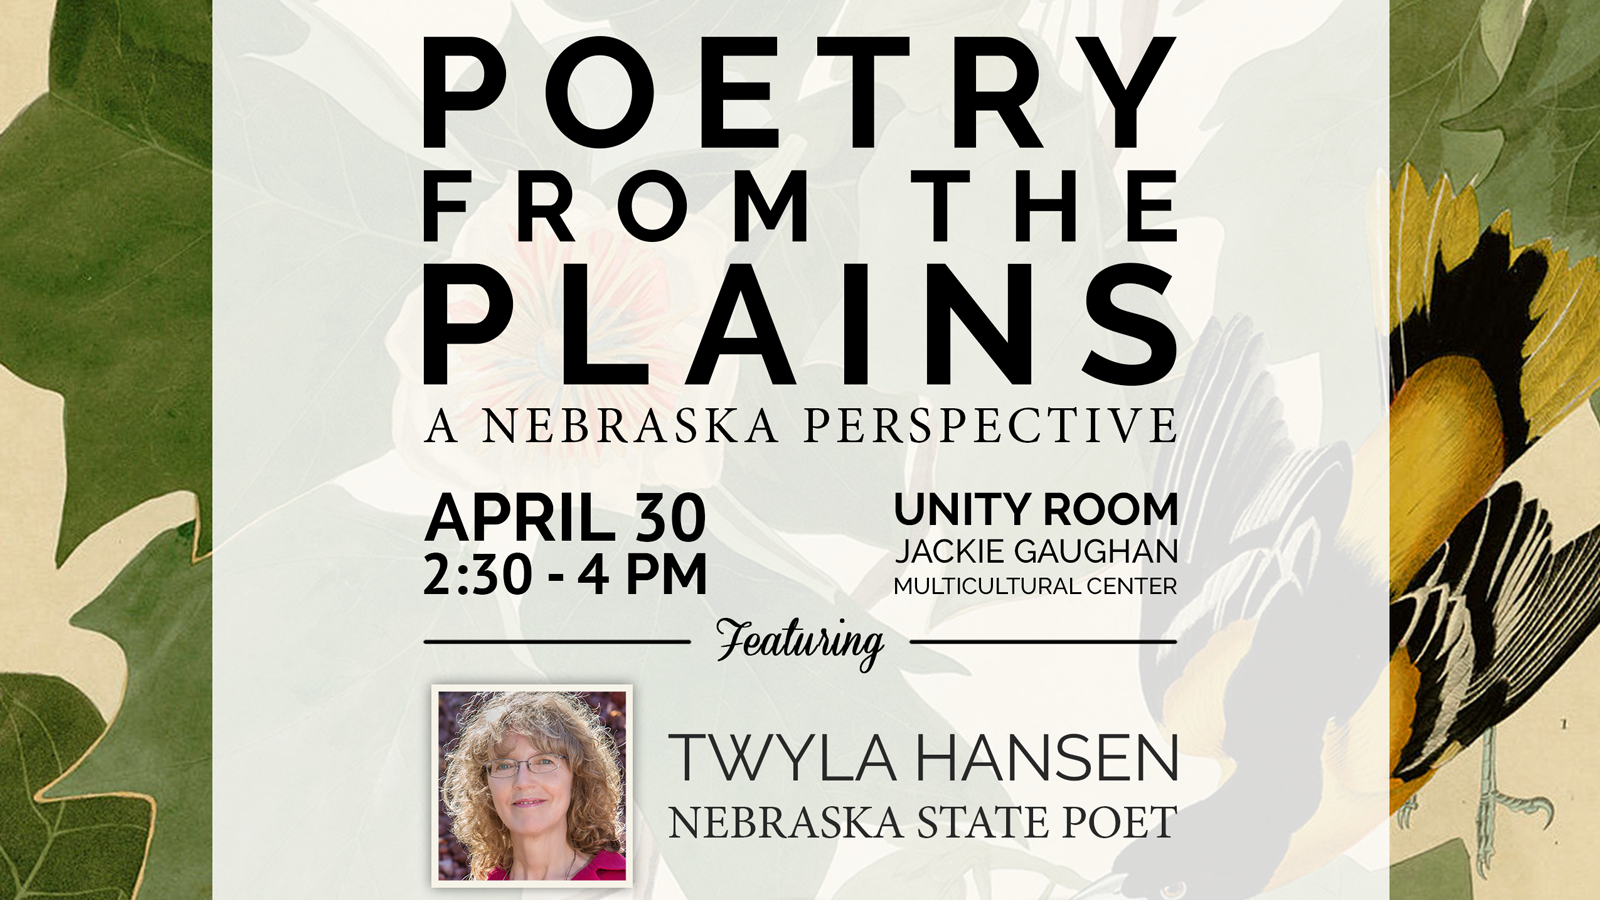 Cropped image of the Poetry from the Plains promotional poster by Erin Chambers; links to news story